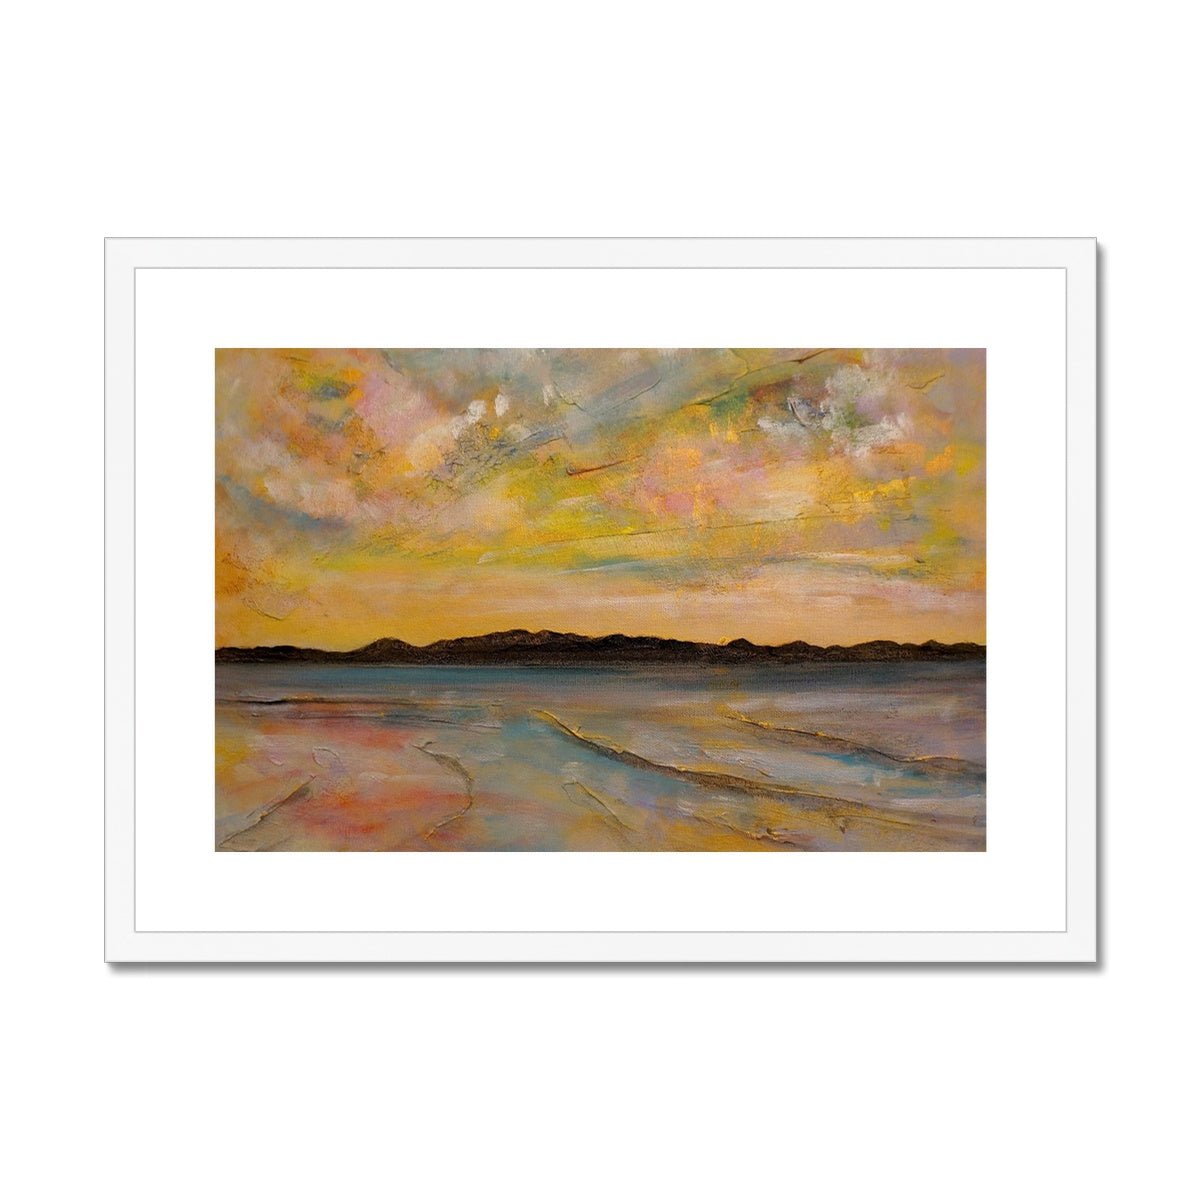 Vallay Island North Uist Painting | Framed & Mounted Prints From Scotland-Framed & Mounted Prints-Hebridean Islands Art Gallery-A2 Landscape-White Frame-Paintings, Prints, Homeware, Art Gifts From Scotland By Scottish Artist Kevin Hunter